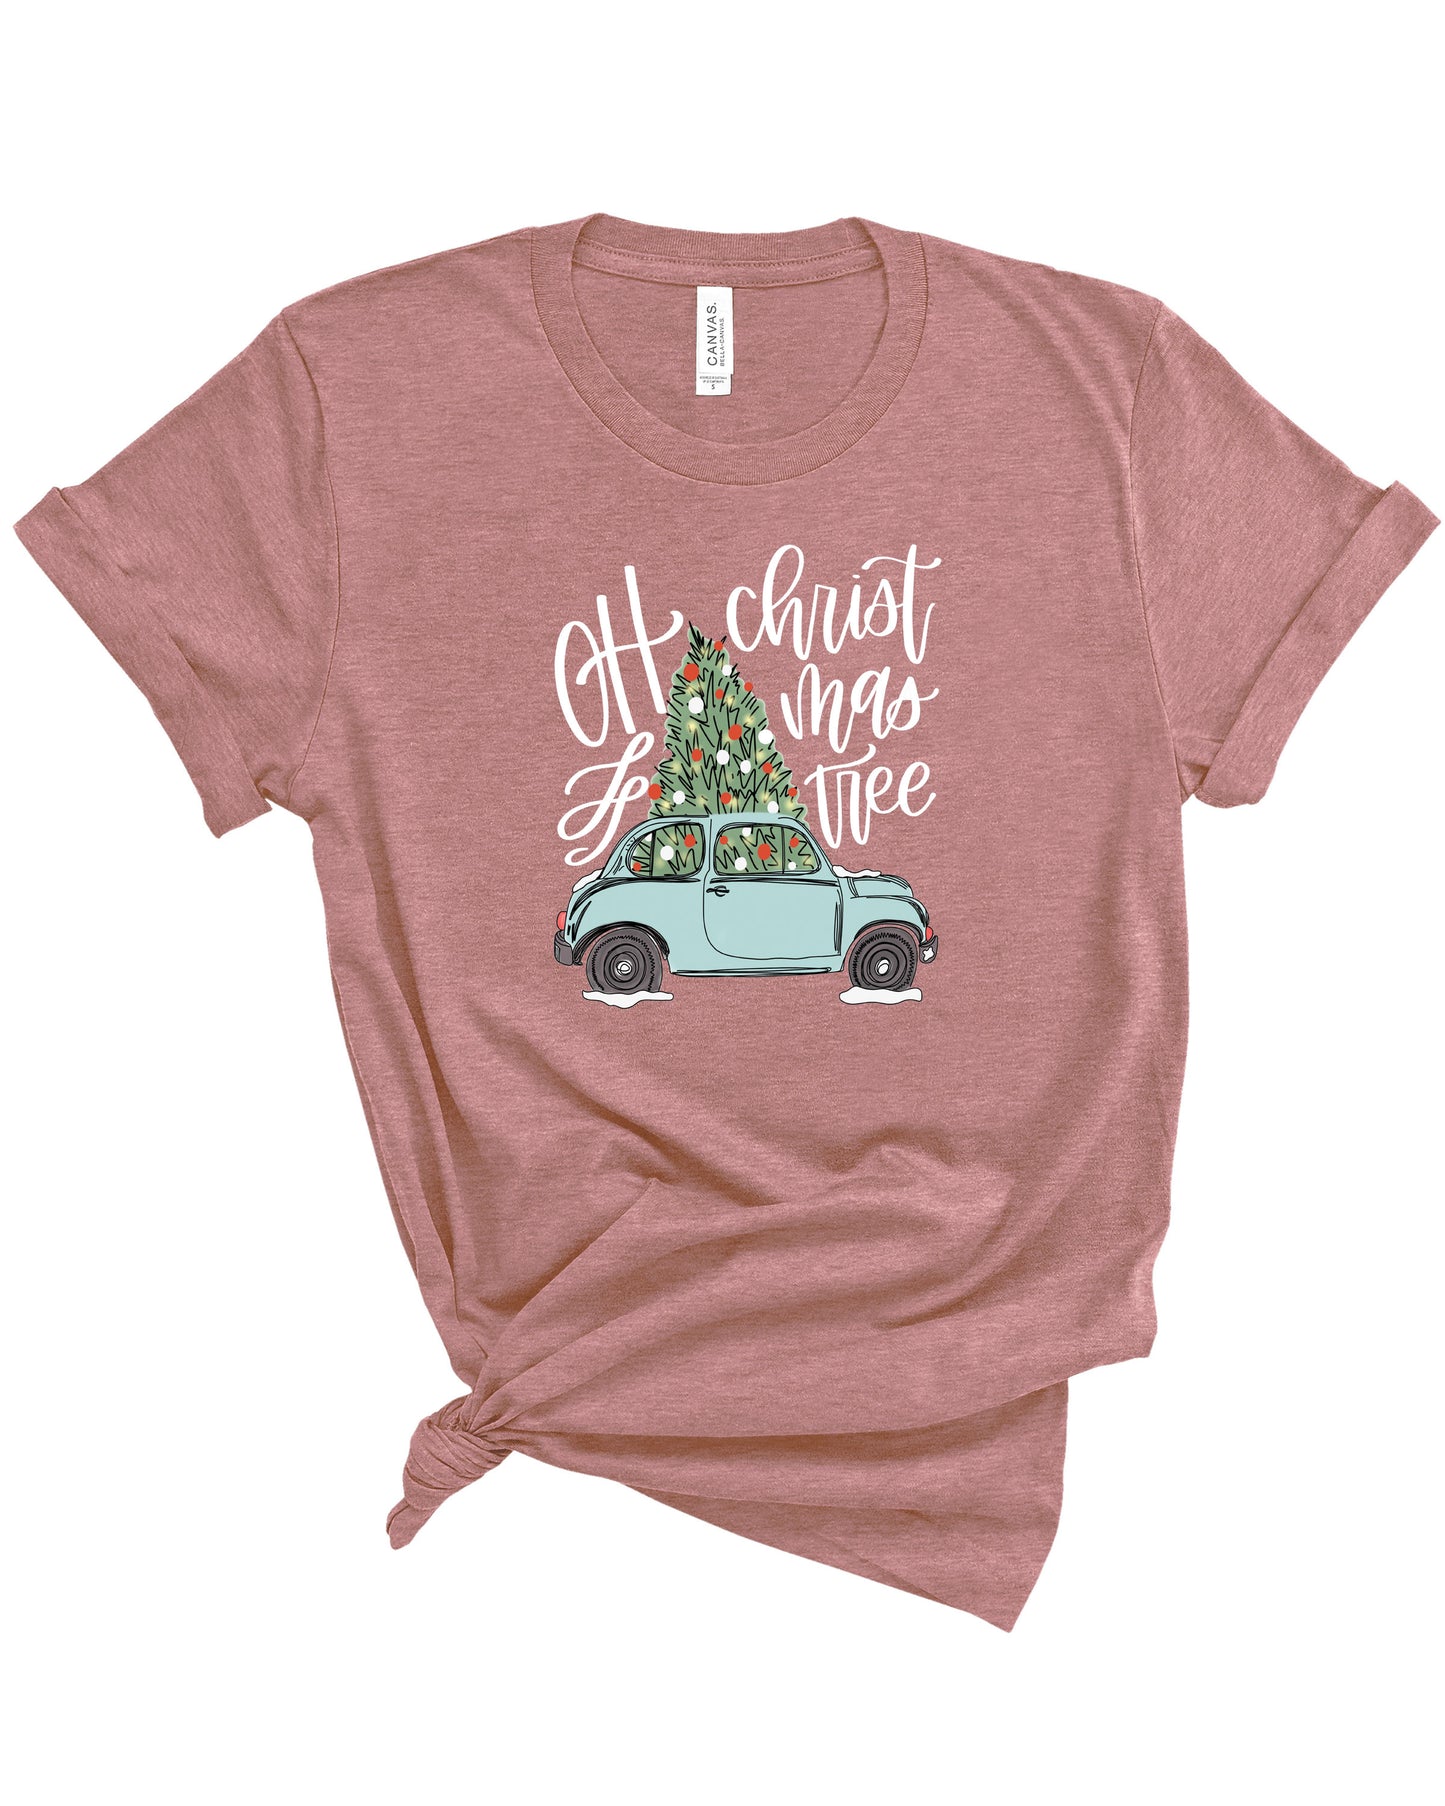 Oh Christmas Tree | Adult Tee-Adult Tee-Sister Shirts-Sister Shirts, Cute & Custom Tees for Mama & Littles in Trussville, Alabama.